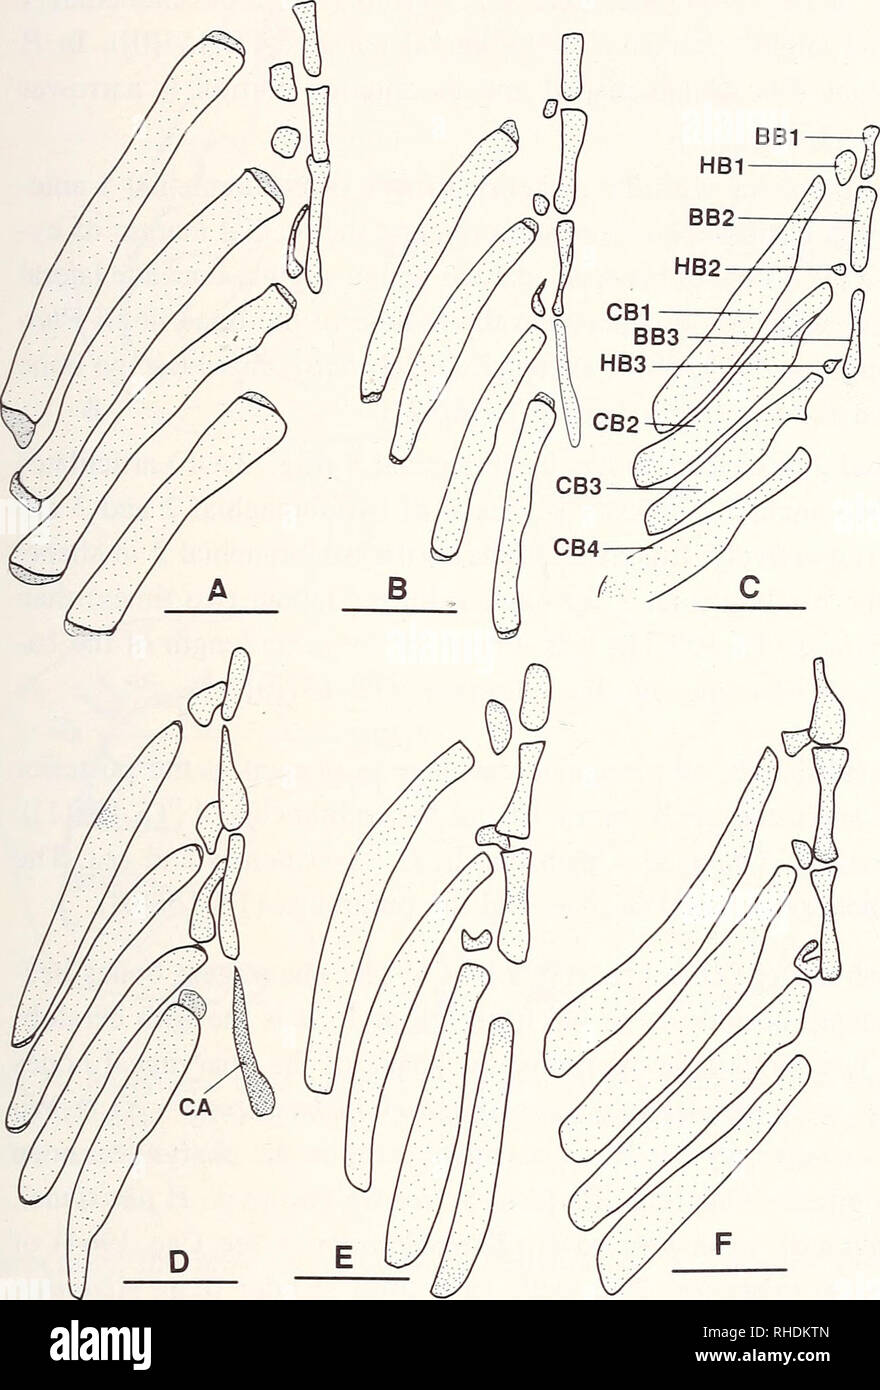 . Bonner zoologische Monographien. Zoology. I 117. Fig.73: Dorsal view of cera- tobranchials, hypobranchials. and basibranchials of Phoxi- nus. A: P. phoxinus (CNUC uncat., 76.0 mm TL); B: P. eos (KU12255, 43.0 mm SL); C: P. cumberlandensis (KU 18934, 52.0 mm SL); D: P. is- sykkulensis (P-10696, 42.4 mm SL); E: P. oreas (KU 3259. 55.0 mm SL); F: P. erythwgaster (KU 5773, 51.5 mm SL). Scale bars = 1 mm. Hypobranchials 1 and 2 (Fig.73A-F) are small bones. No variation with phylogenetic sig- nificance is present among Phoxinus species. Hypobranchial 3 (Fig.73A-F) is a slender bone tapering ventra Stock Photo